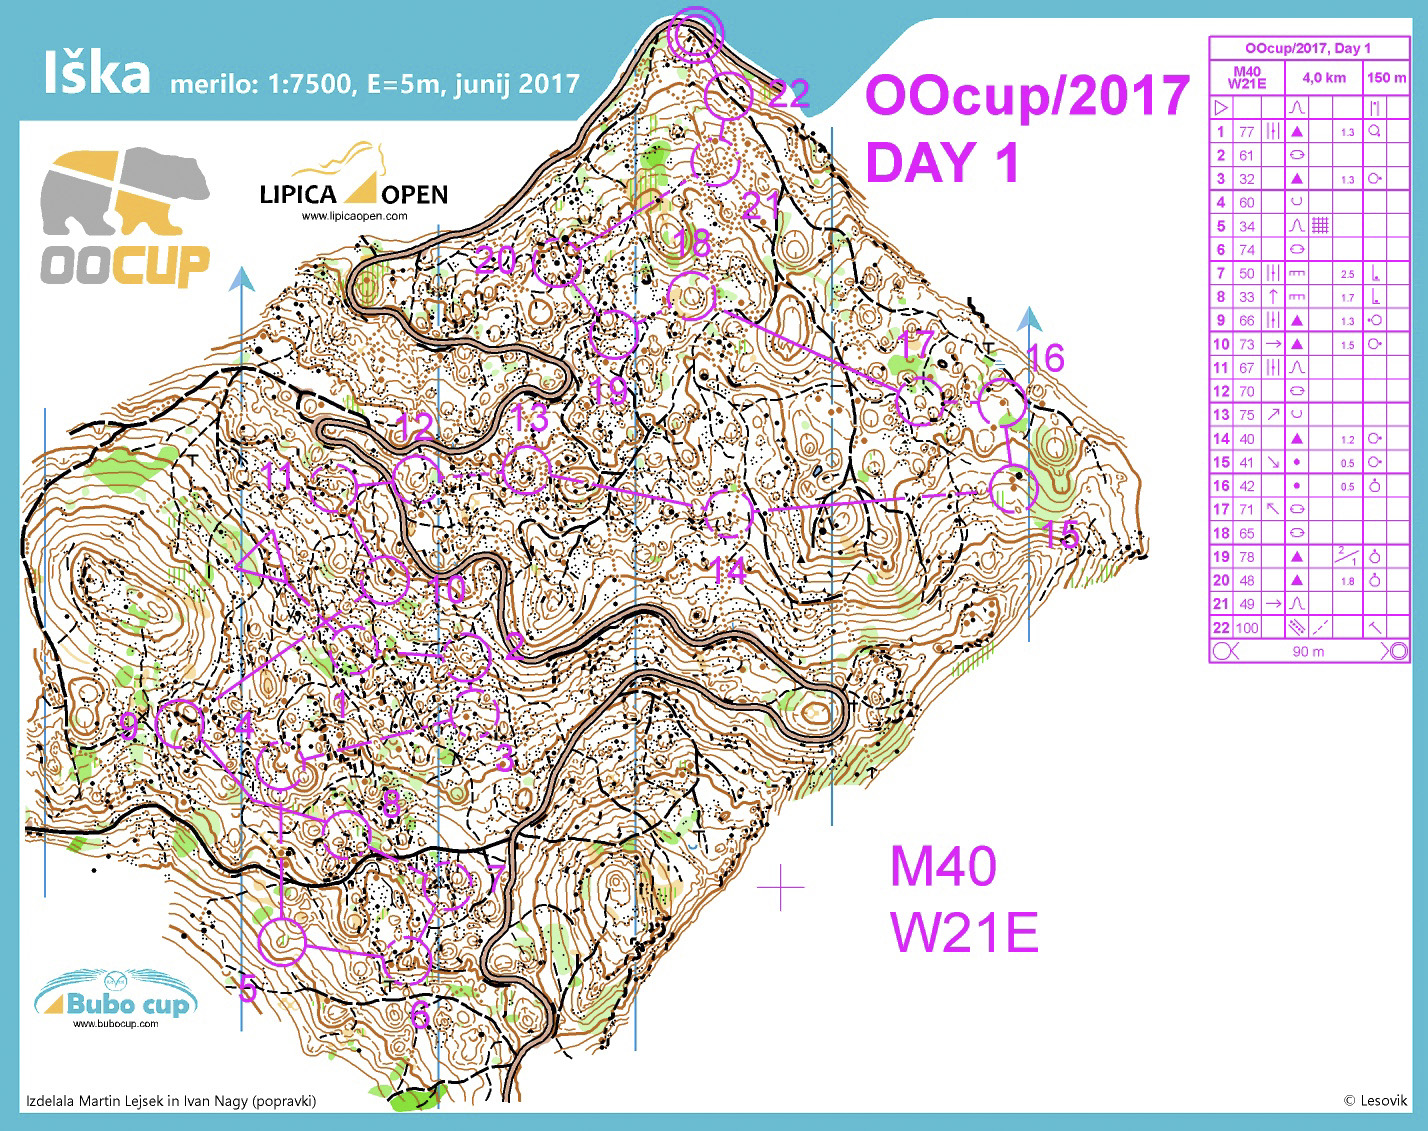 Oocup 2017 Day 1 (24.07.2017)